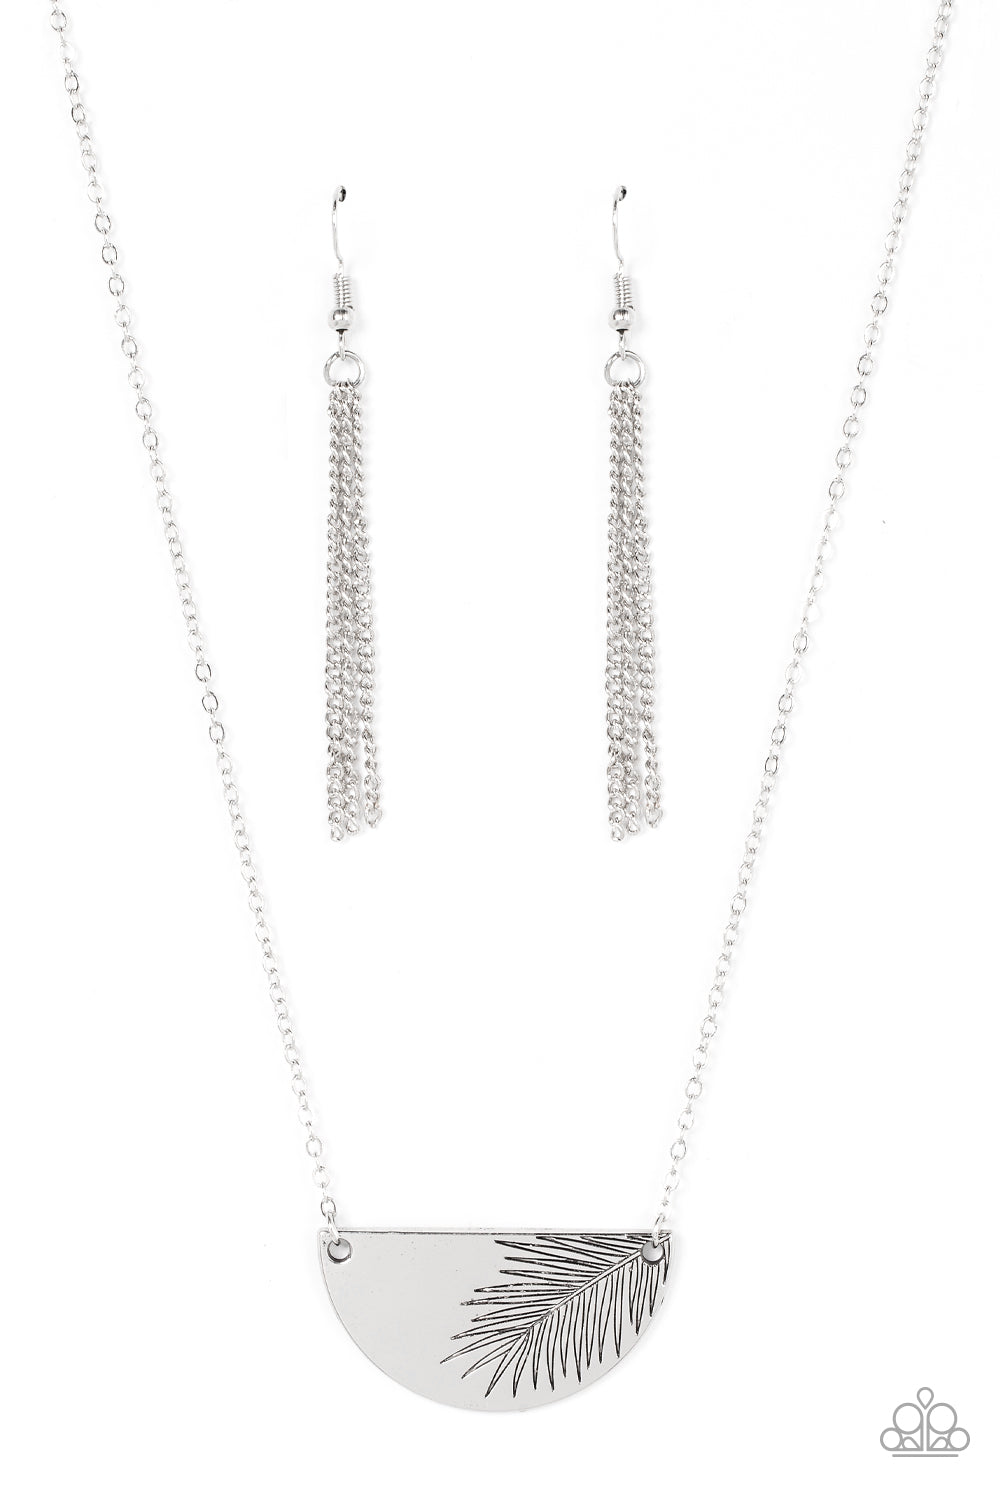 COOL, PALM, AND COLLECTED SILVER-NECKLACE